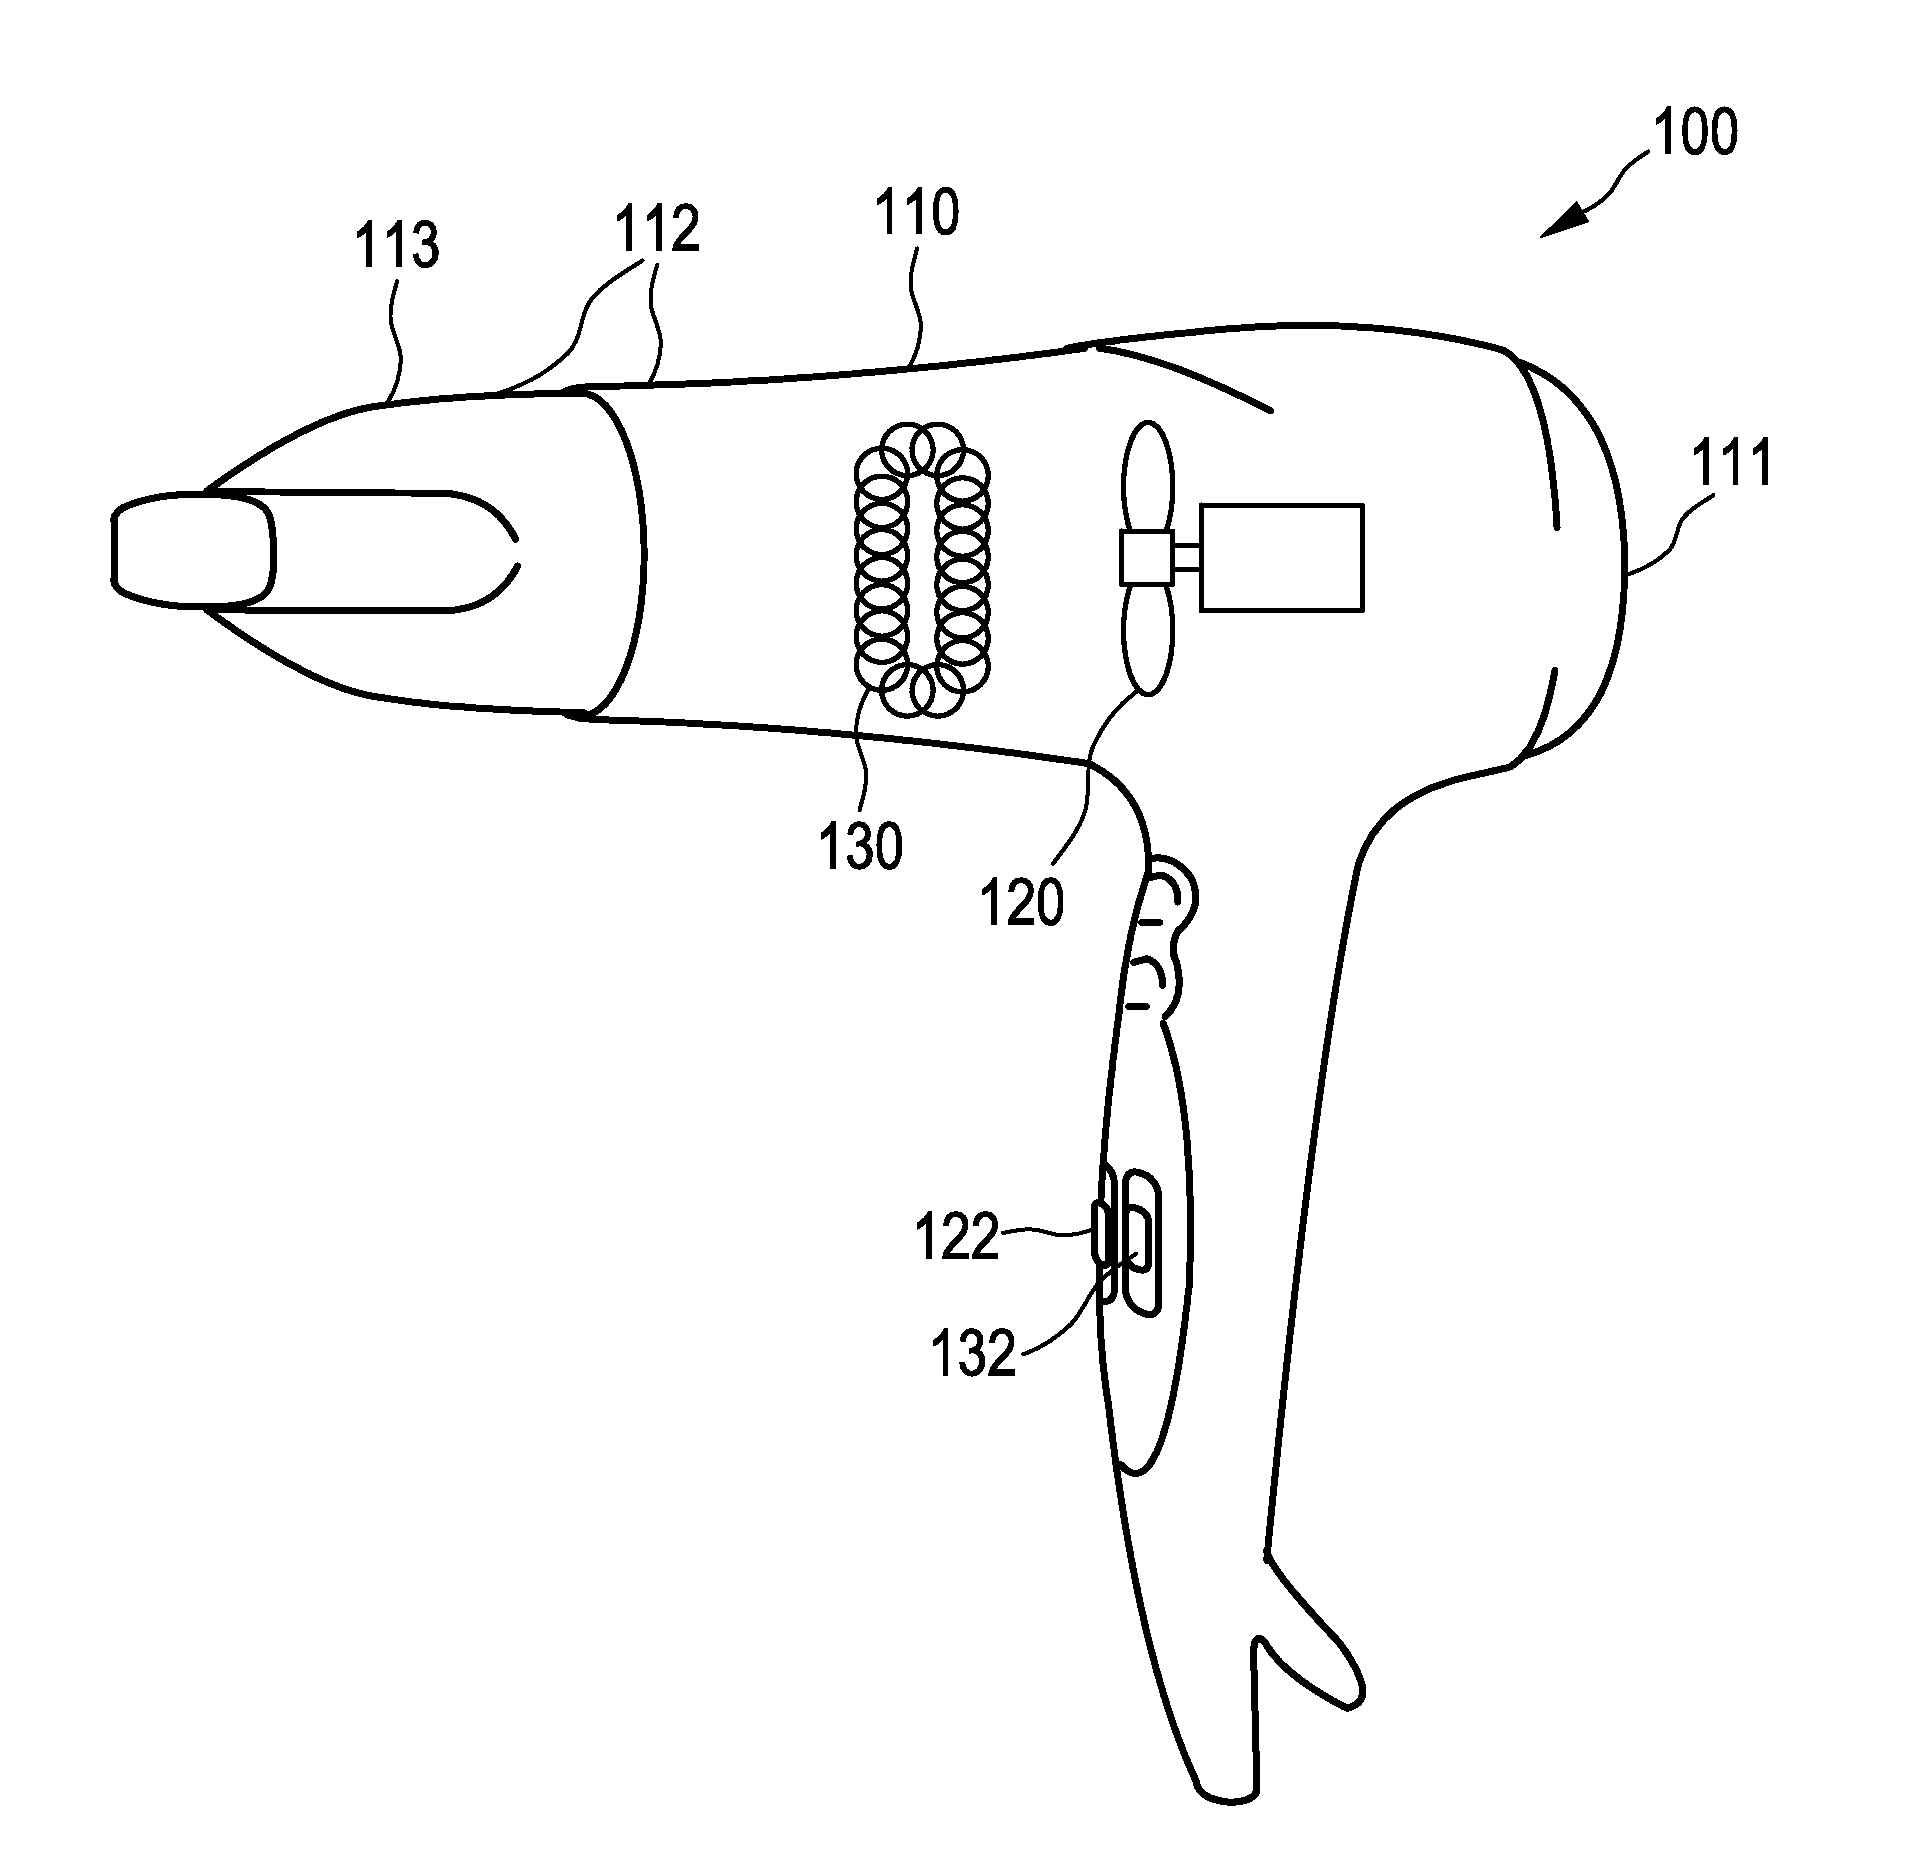 Hair dryer with air outlet arrangement